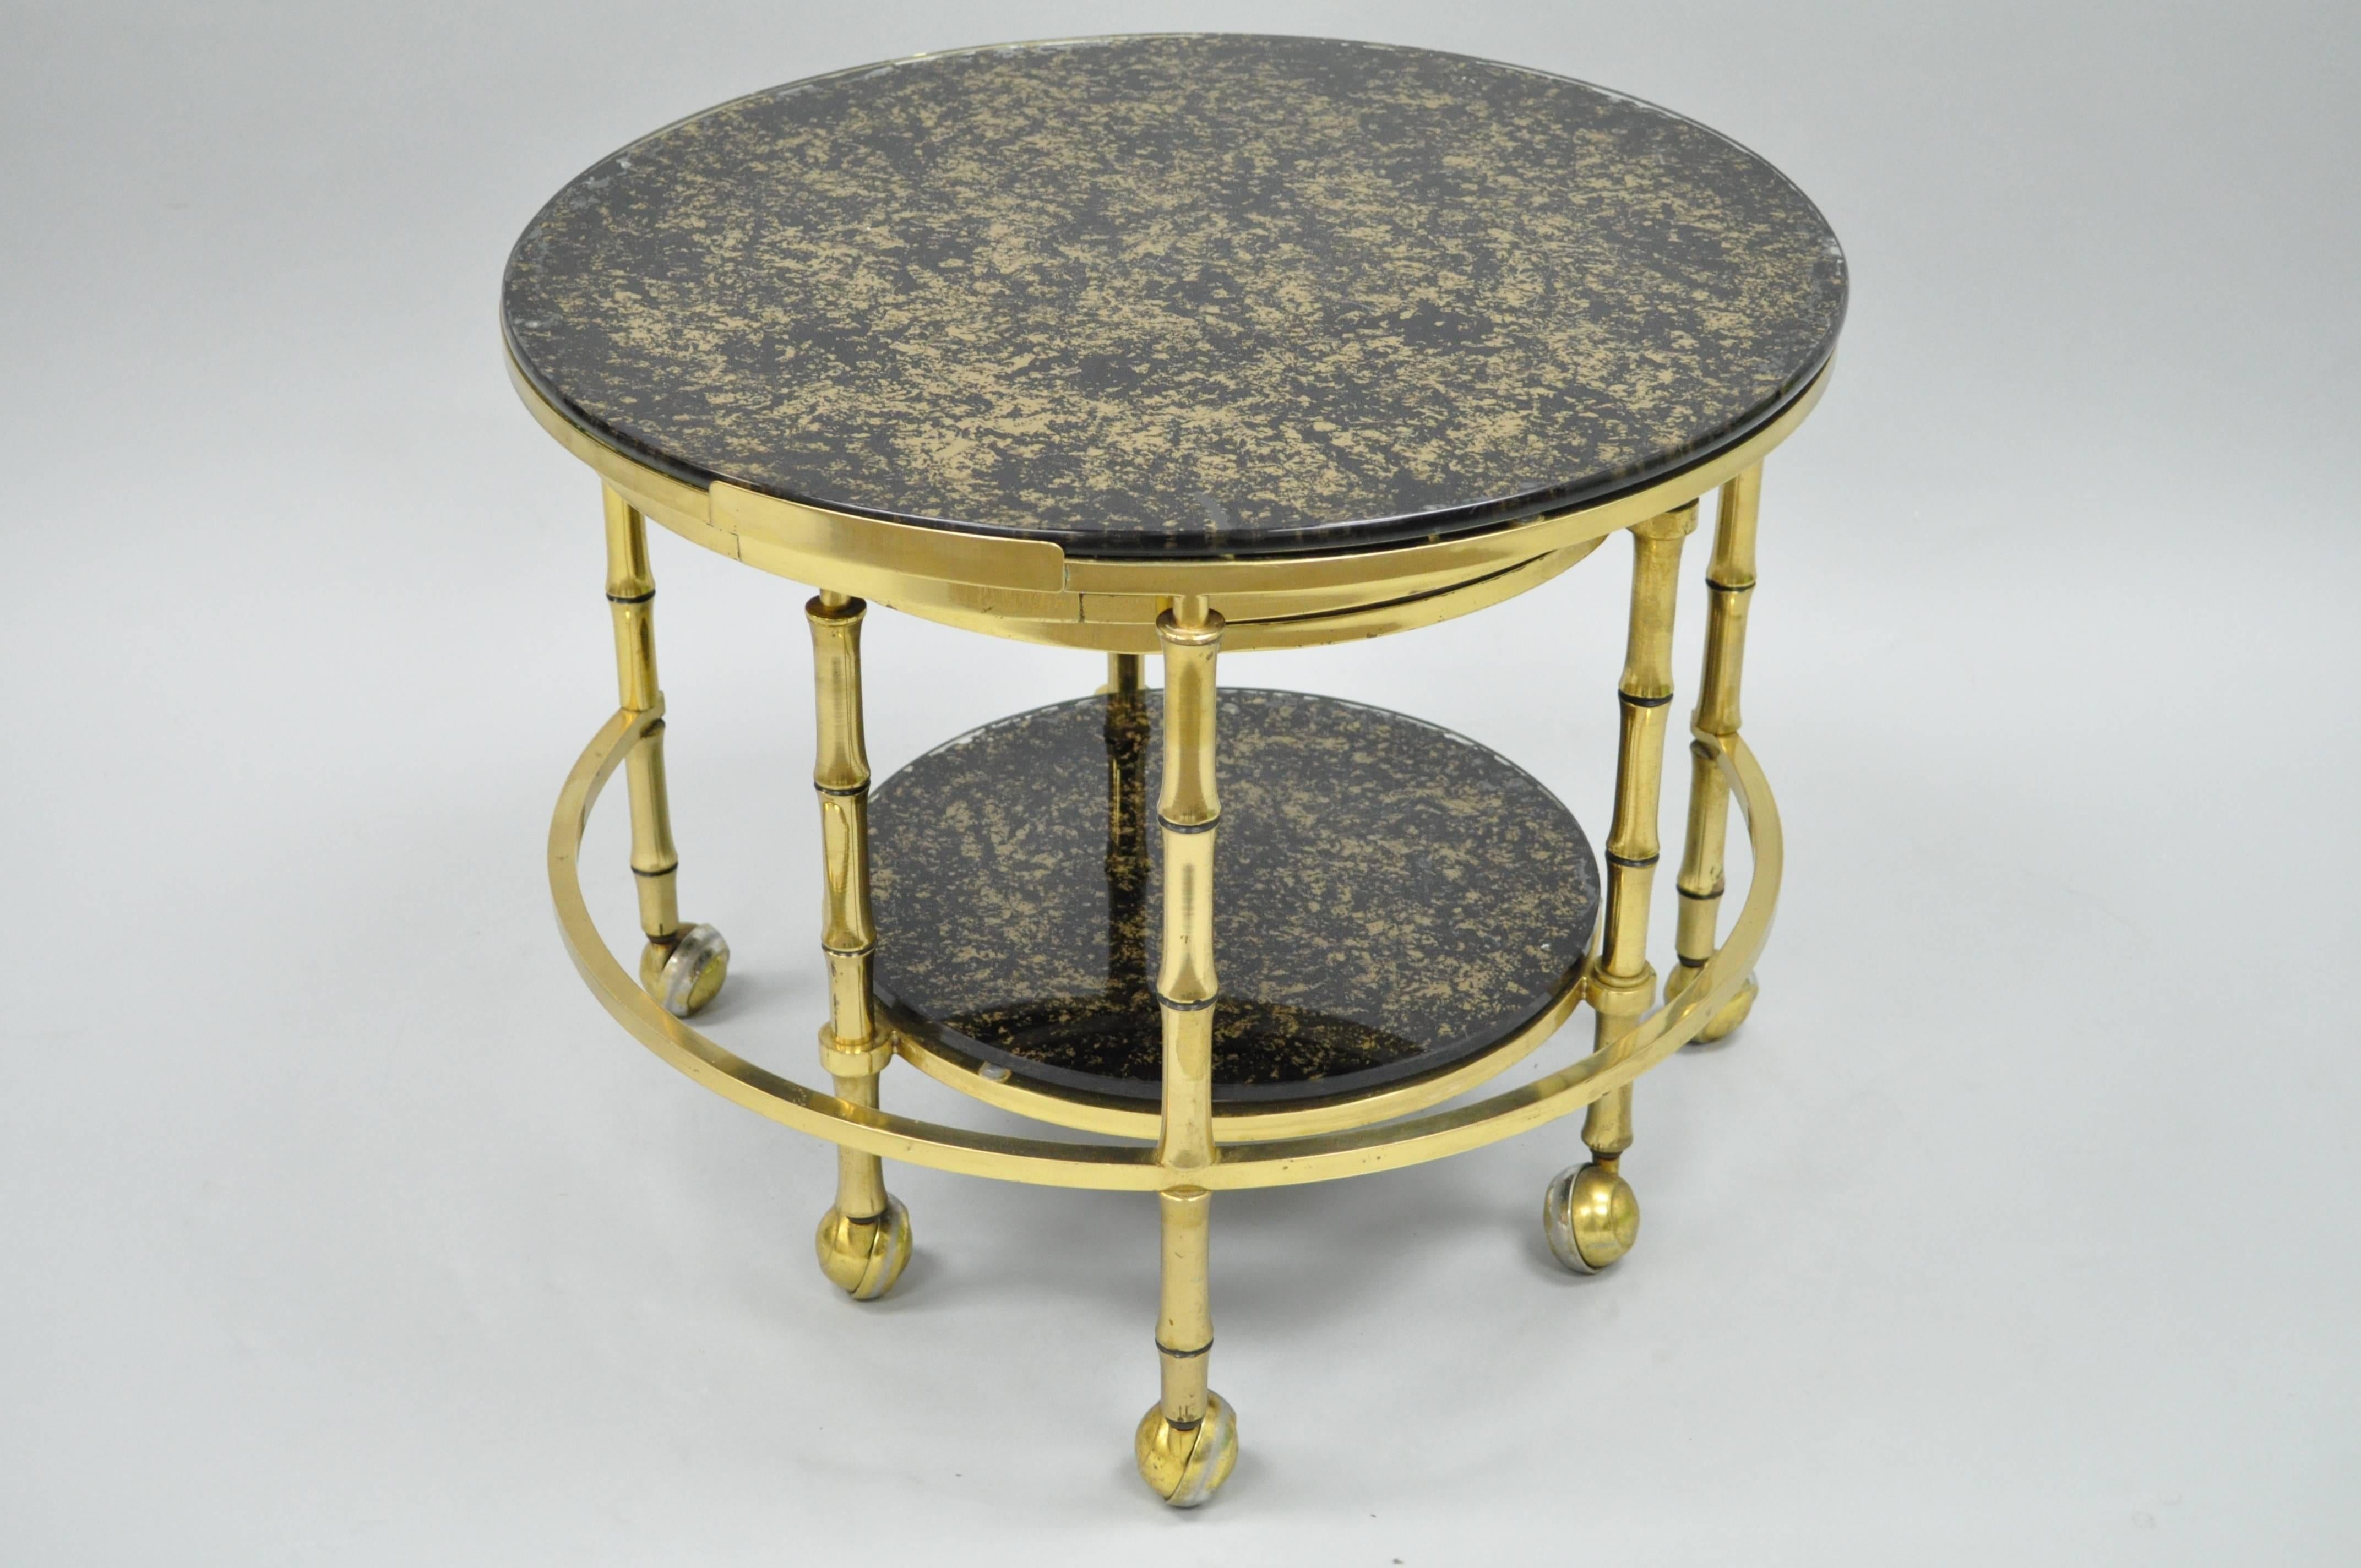 Vintage Hollywood Regency faux bamboo solid brass and glass nesting tables. This unique set features three round brass faux bamboo folding/expanding frames on rolling casters and gold flecks decorated black glass tops. Great for use as a coffee